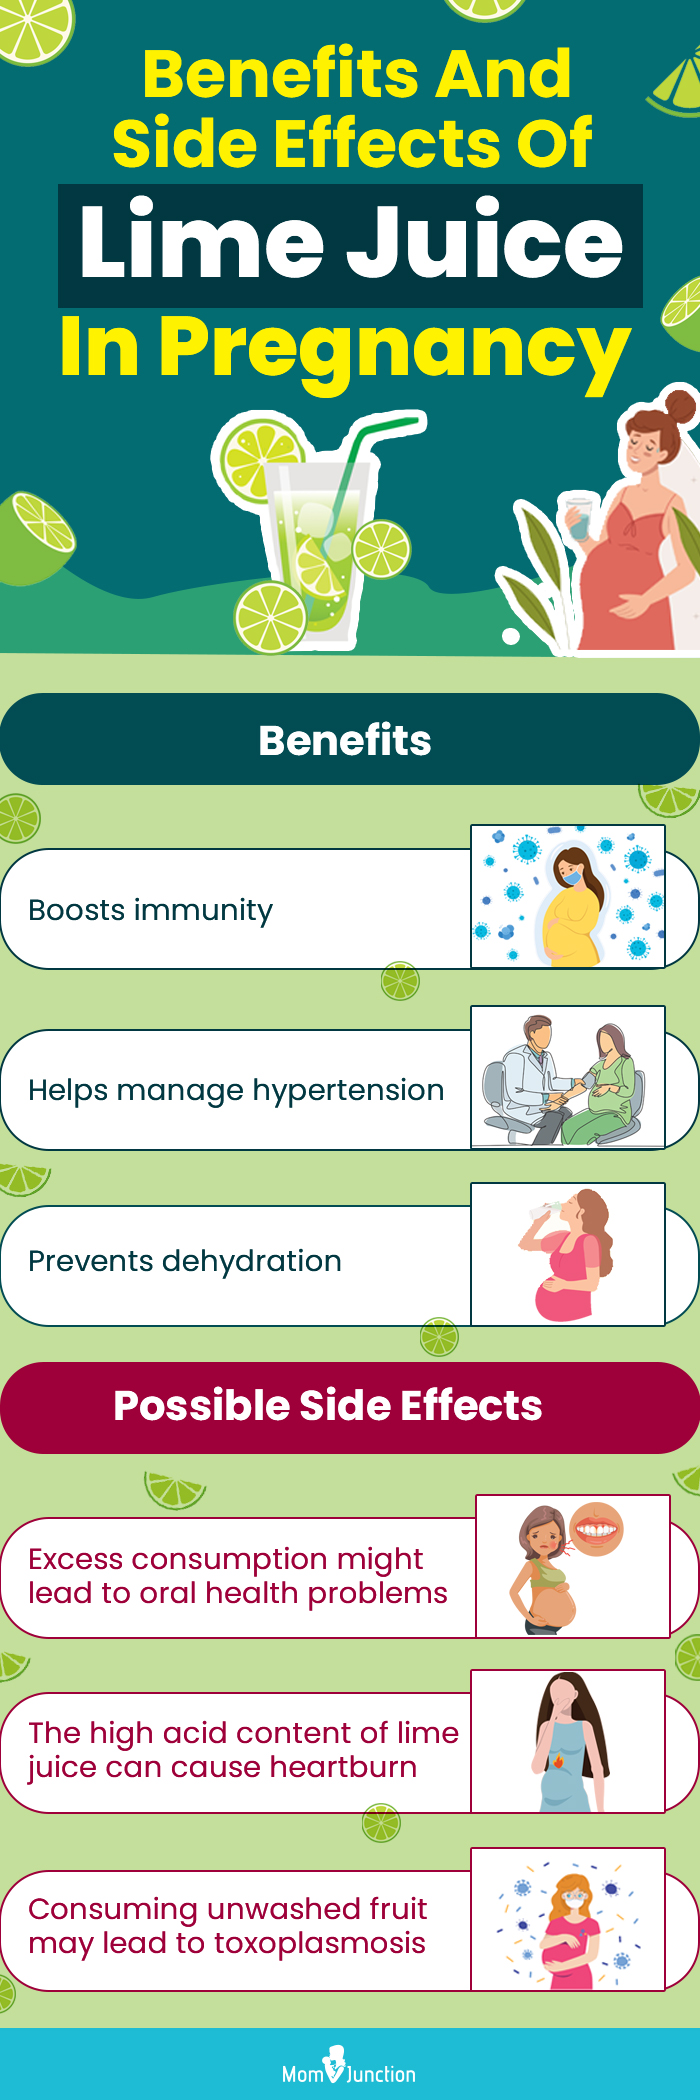 benefits and side effects of lime juice in pregnancy (infographic)